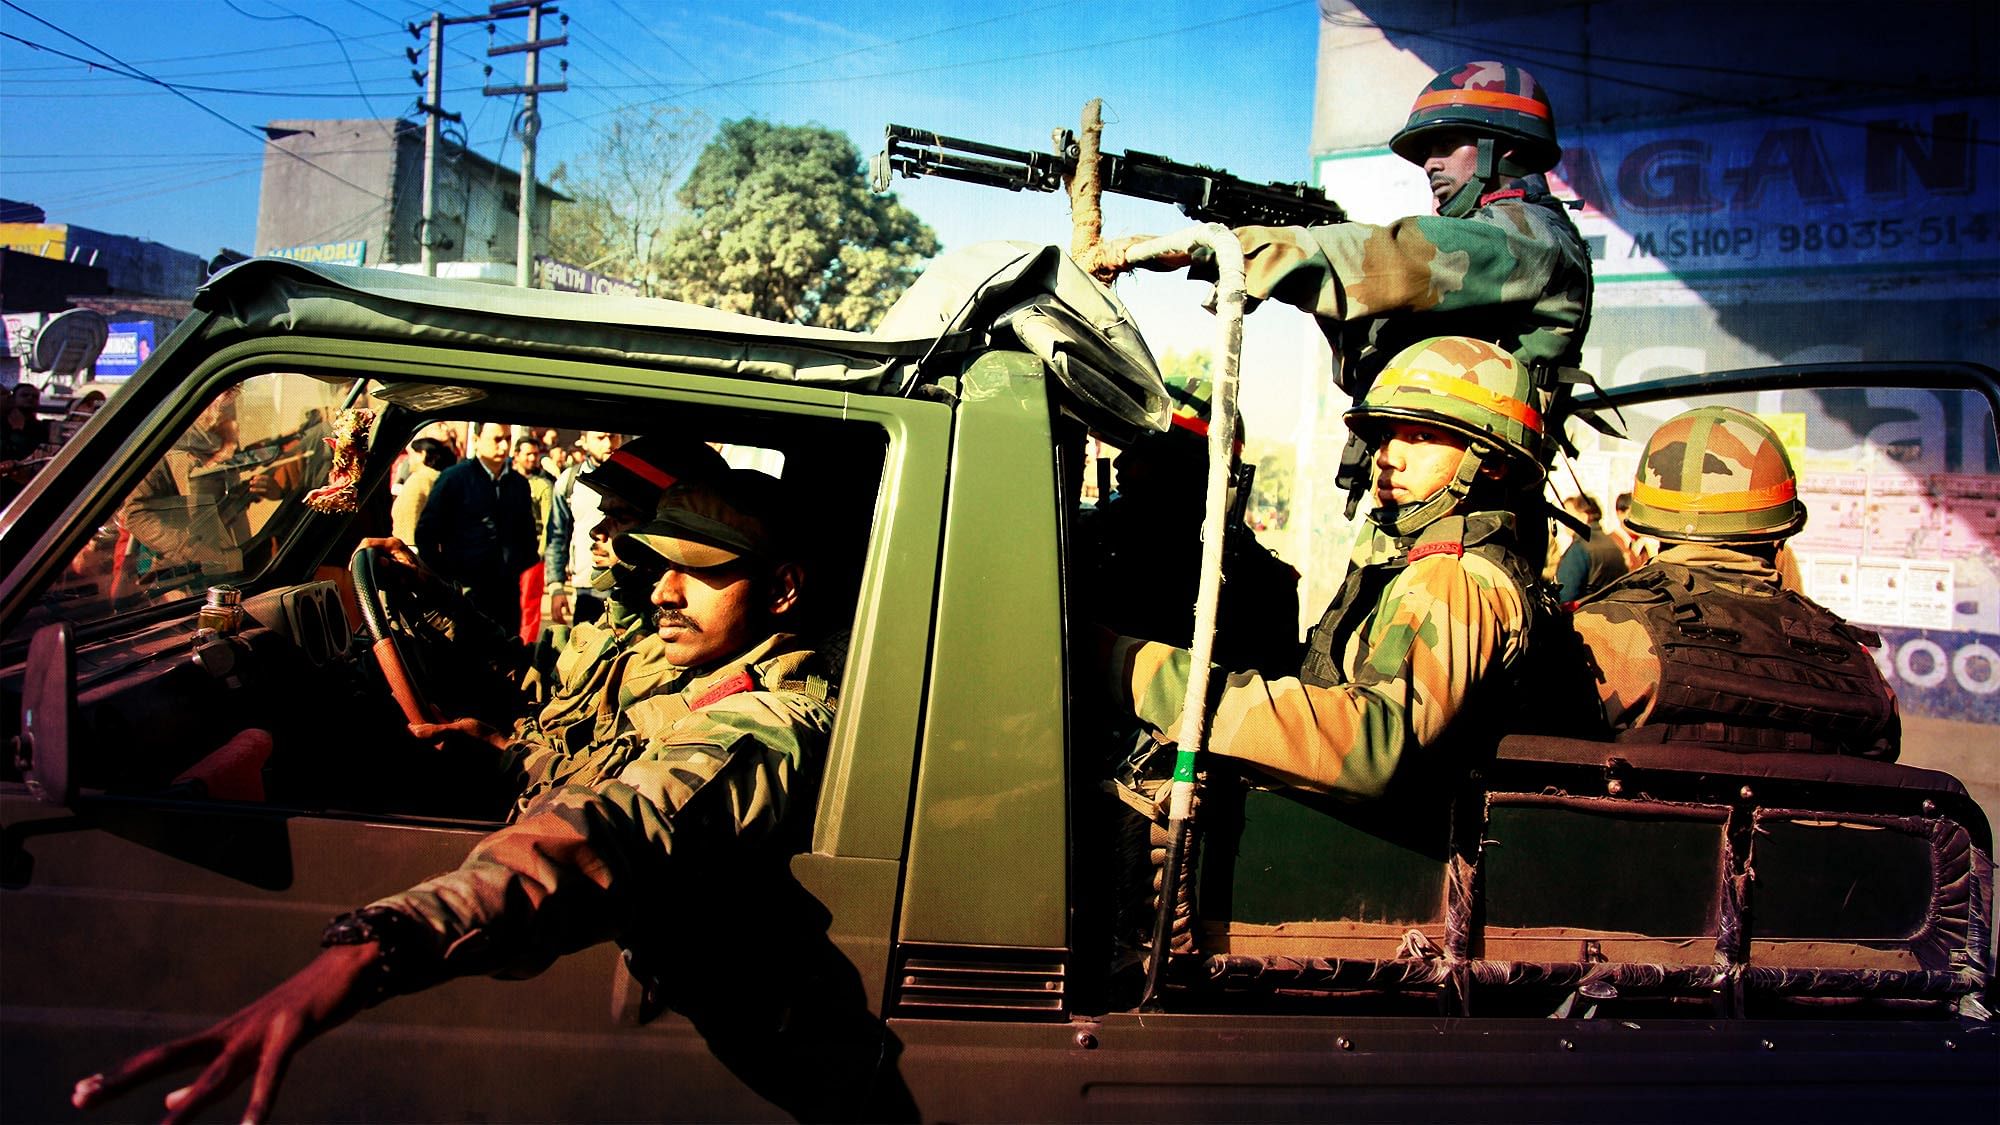 Armed forces during the counter-terror operation at Pathankot.  (Photo: <b>The Quint</b>)